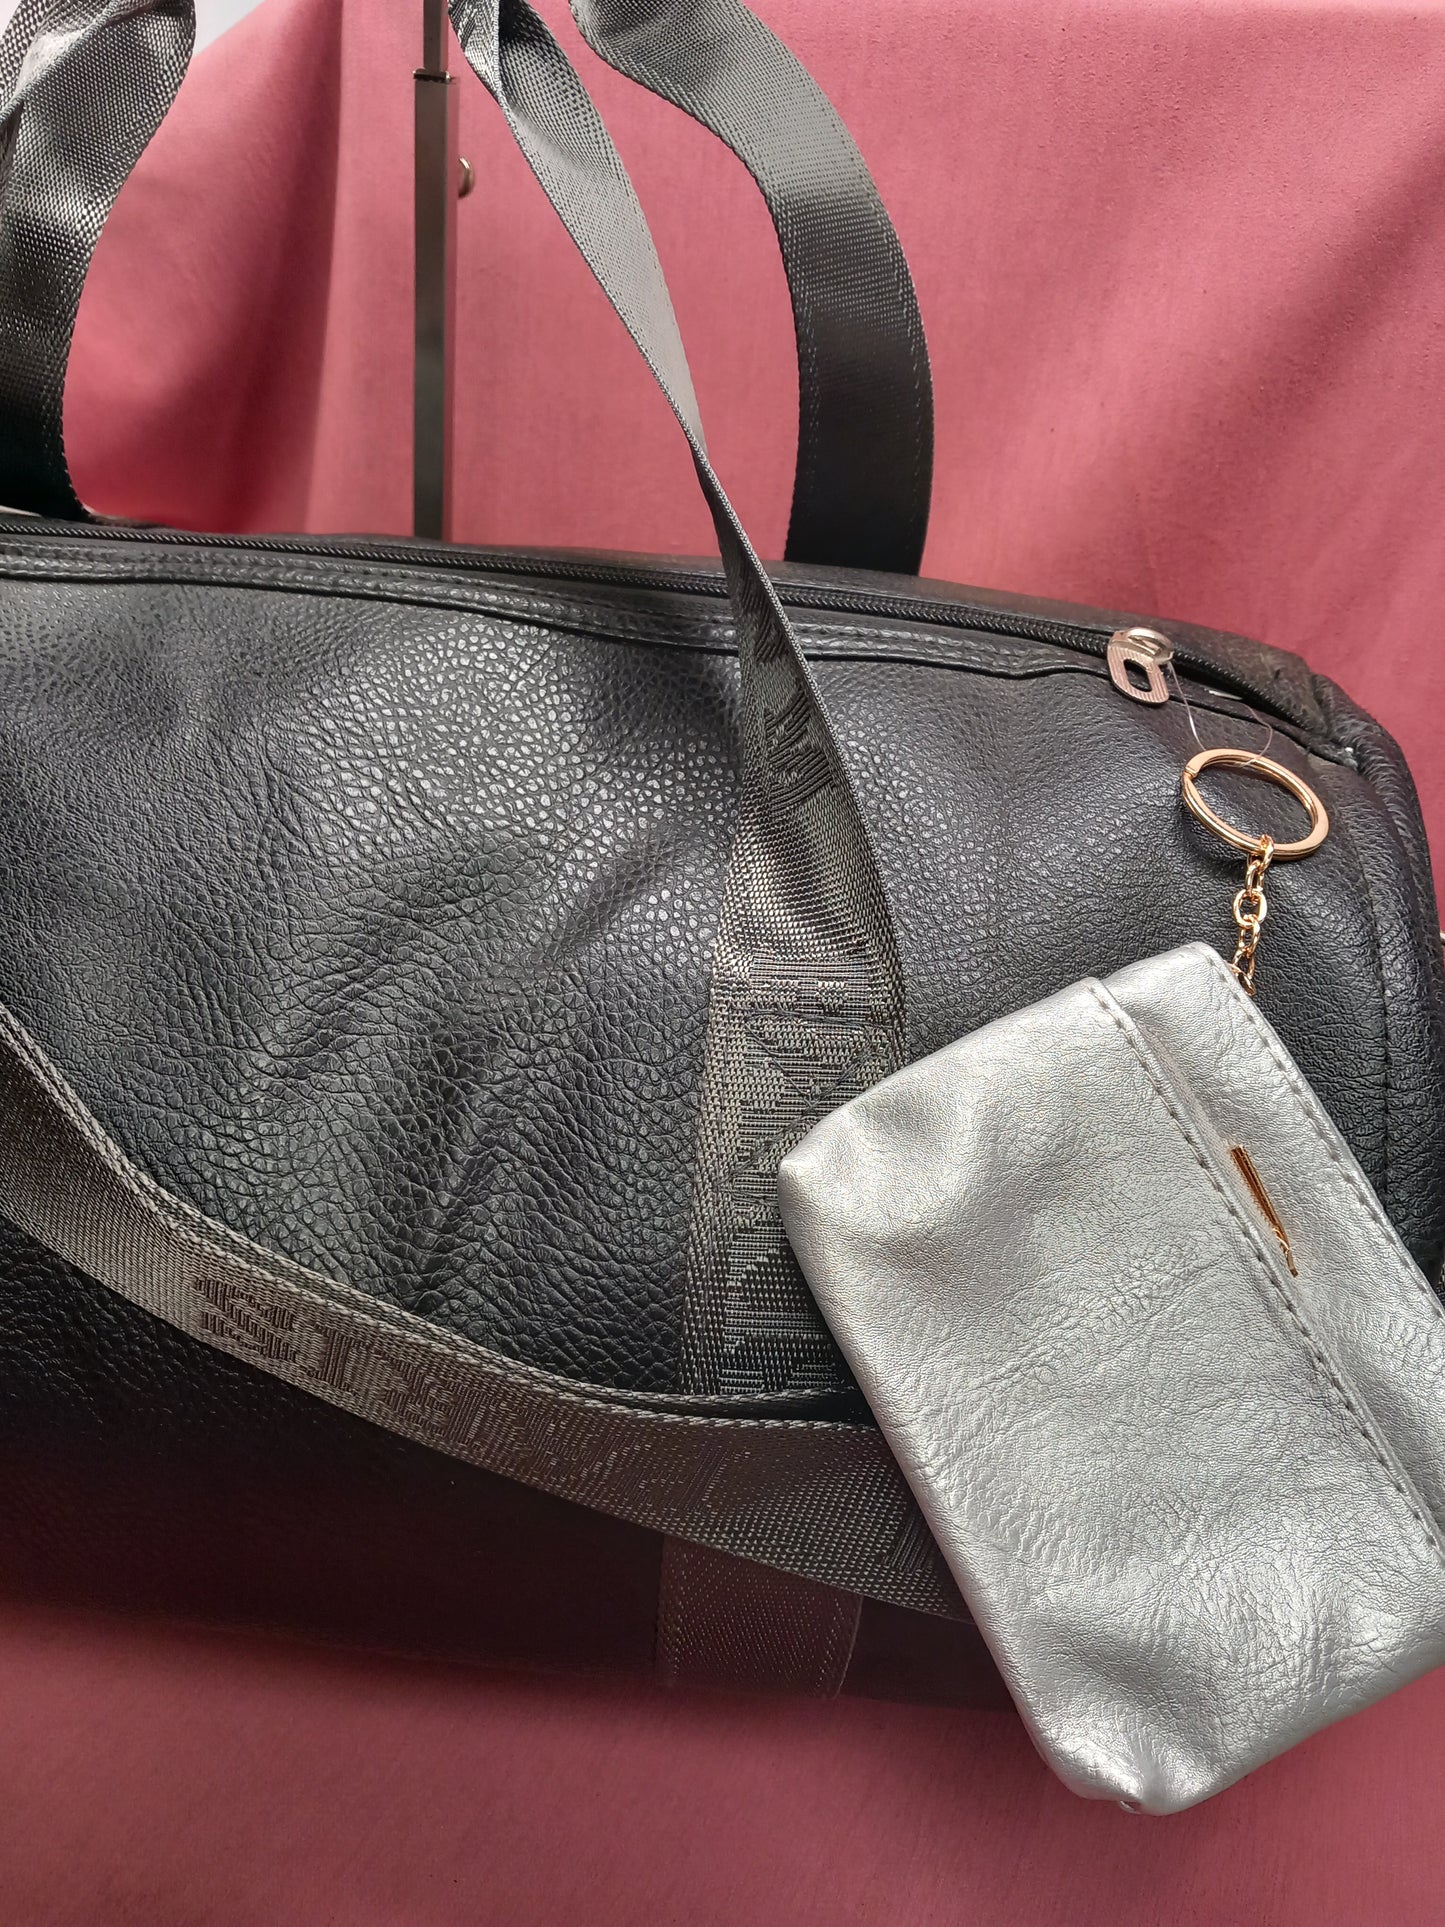 Leatherette travel or gym bag with purse included